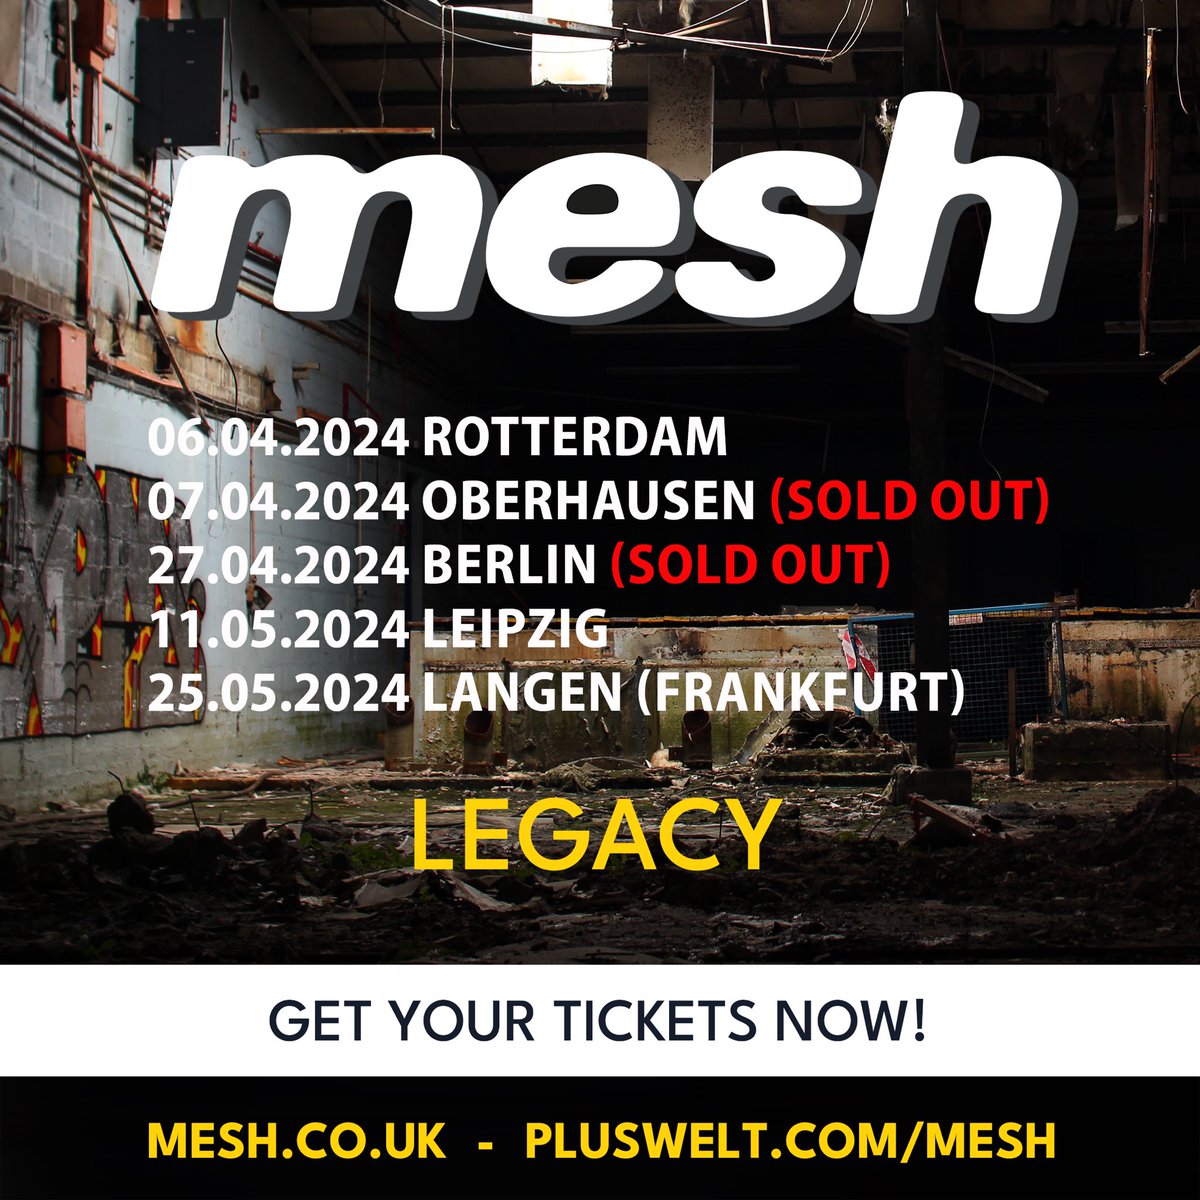 Don’t miss out, all remaining tickets are selling fast! #mesh #meshlive #leipzig #berlin #frankfurt #rotterdam #oberhausen